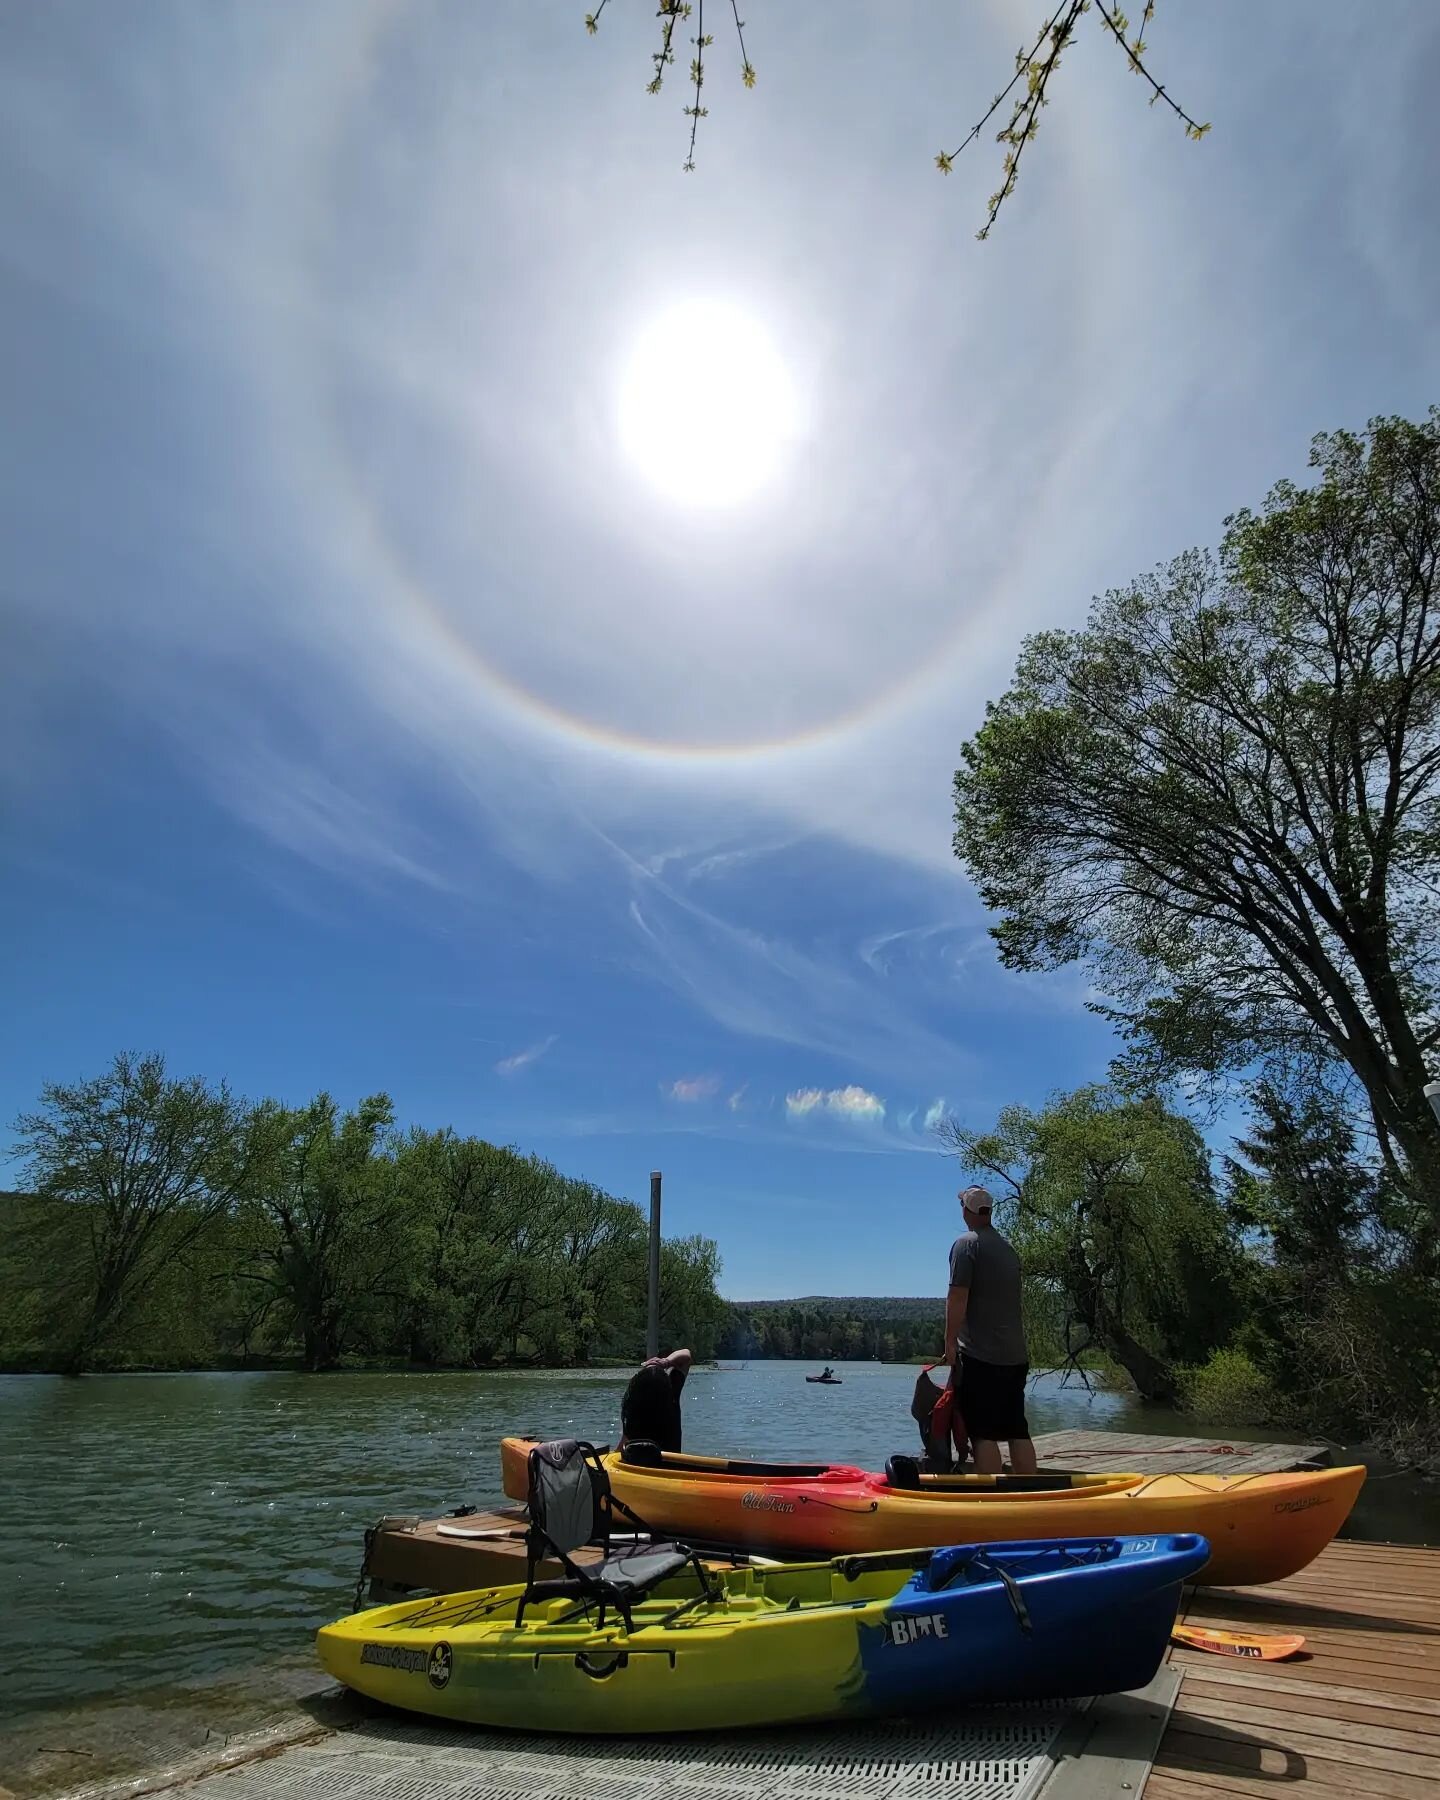 Check out this solar halo that was over Portlandville this Mother's Day. Some say it is a sign of good luck, and others believe it's the angels smiling down on us 😇 We hope you had a good weekend! 
&bull;
May hours: Open daily 10-6, Sunday 11-5
&bul